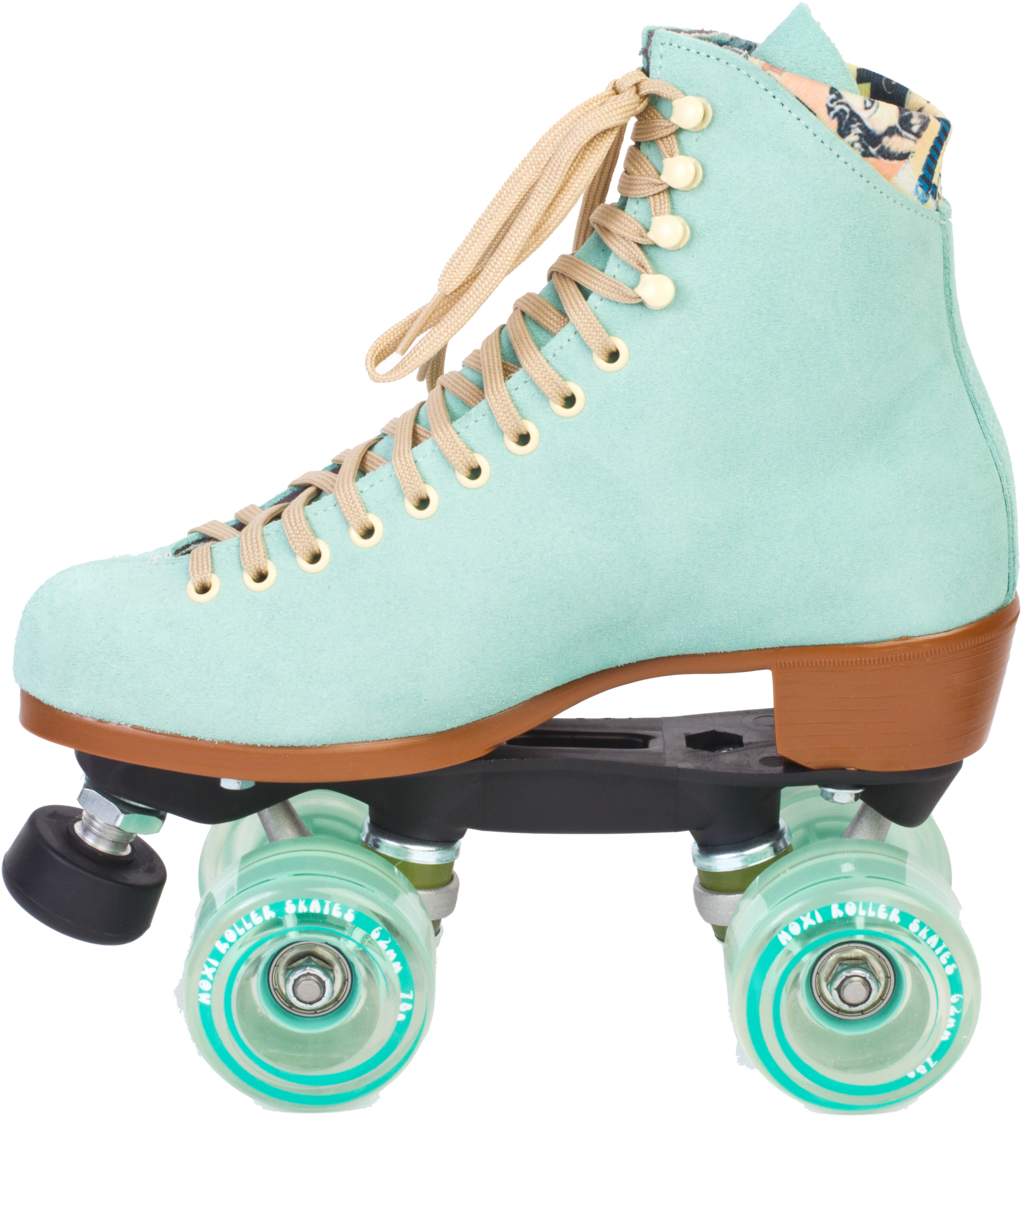 A Close Up Of A Roller Skate